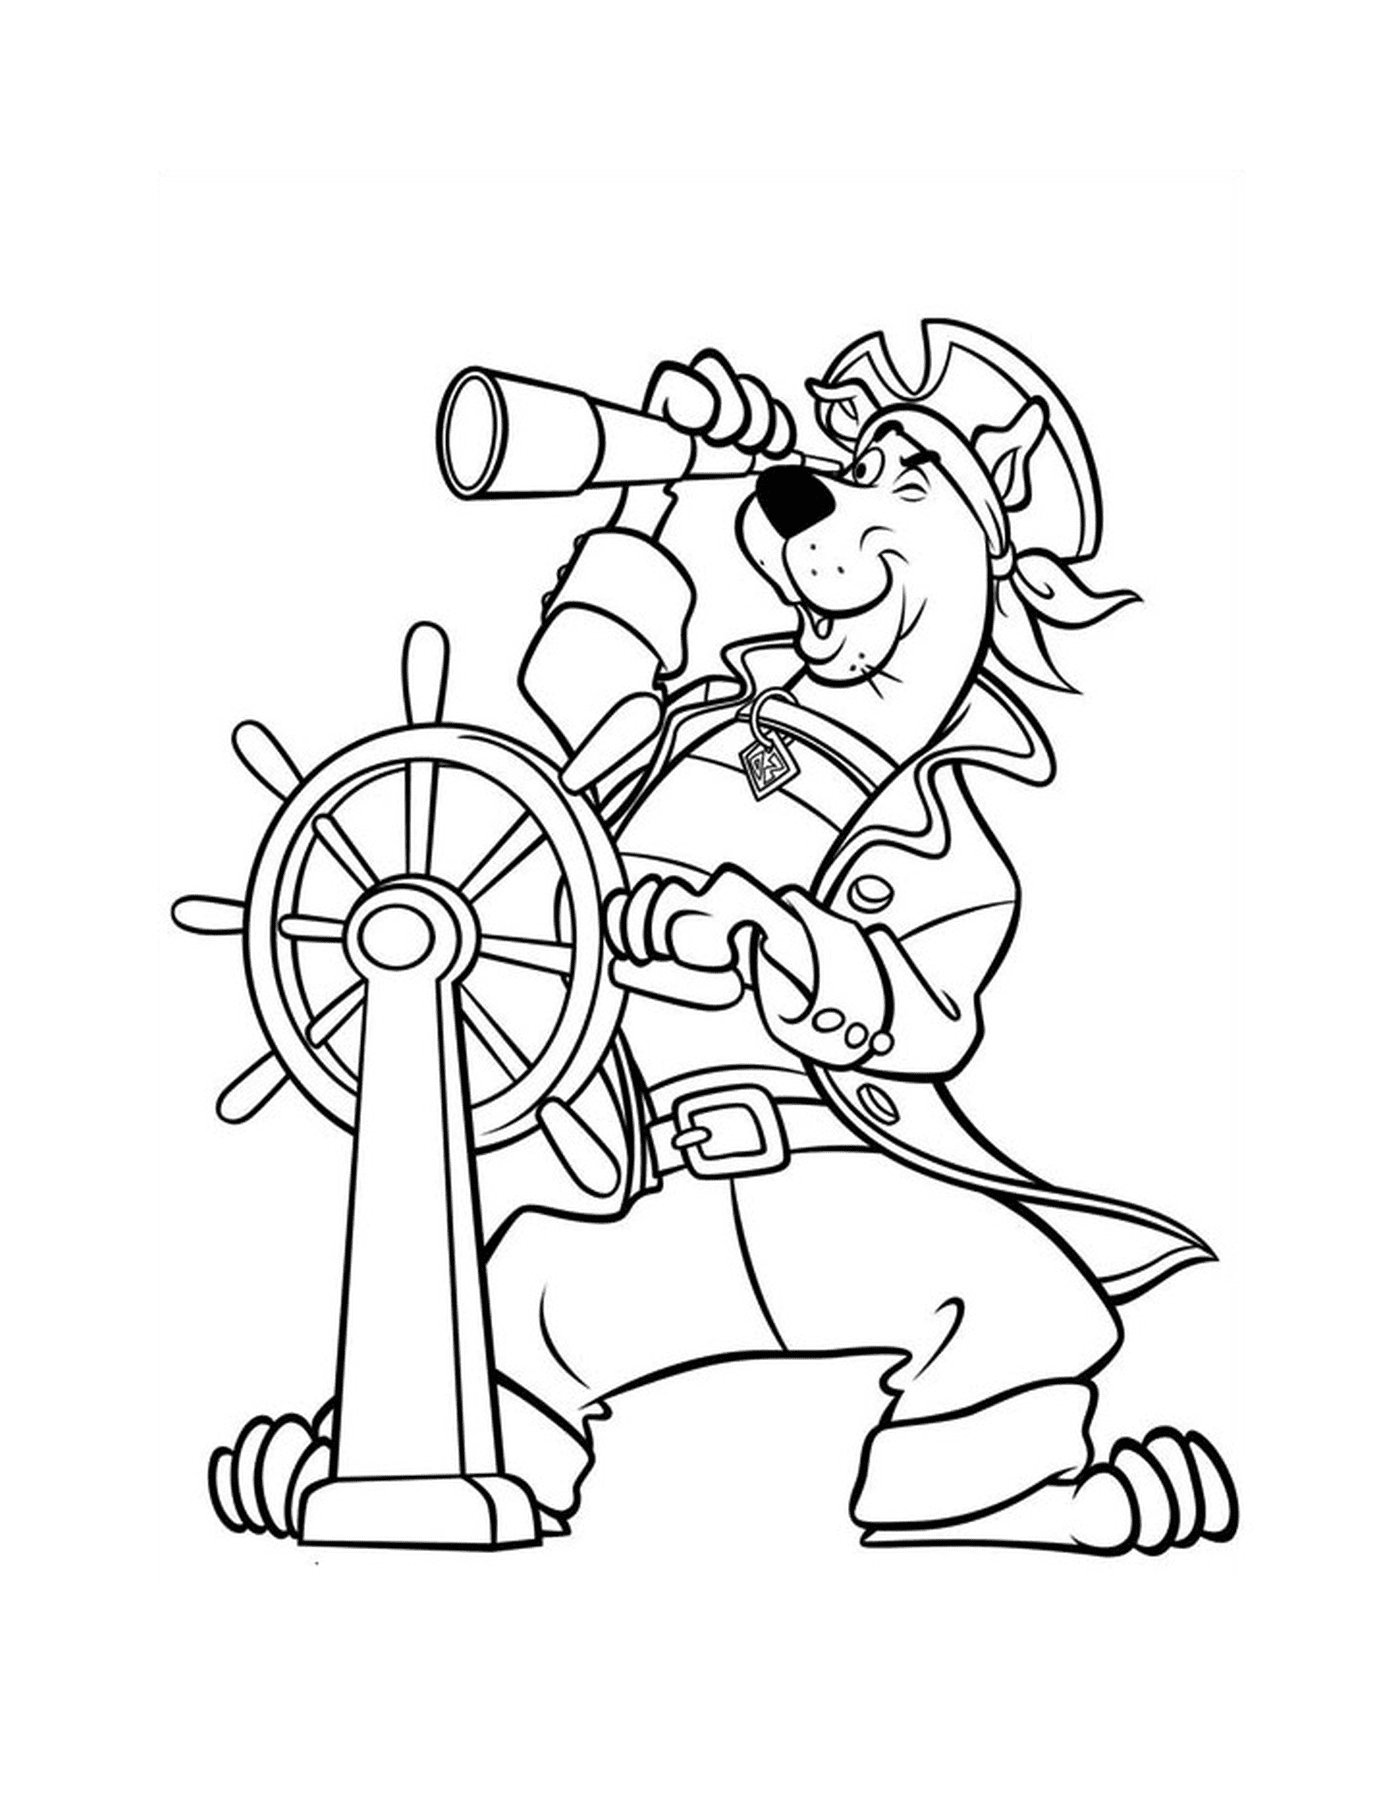  A dog in a pirate suit 